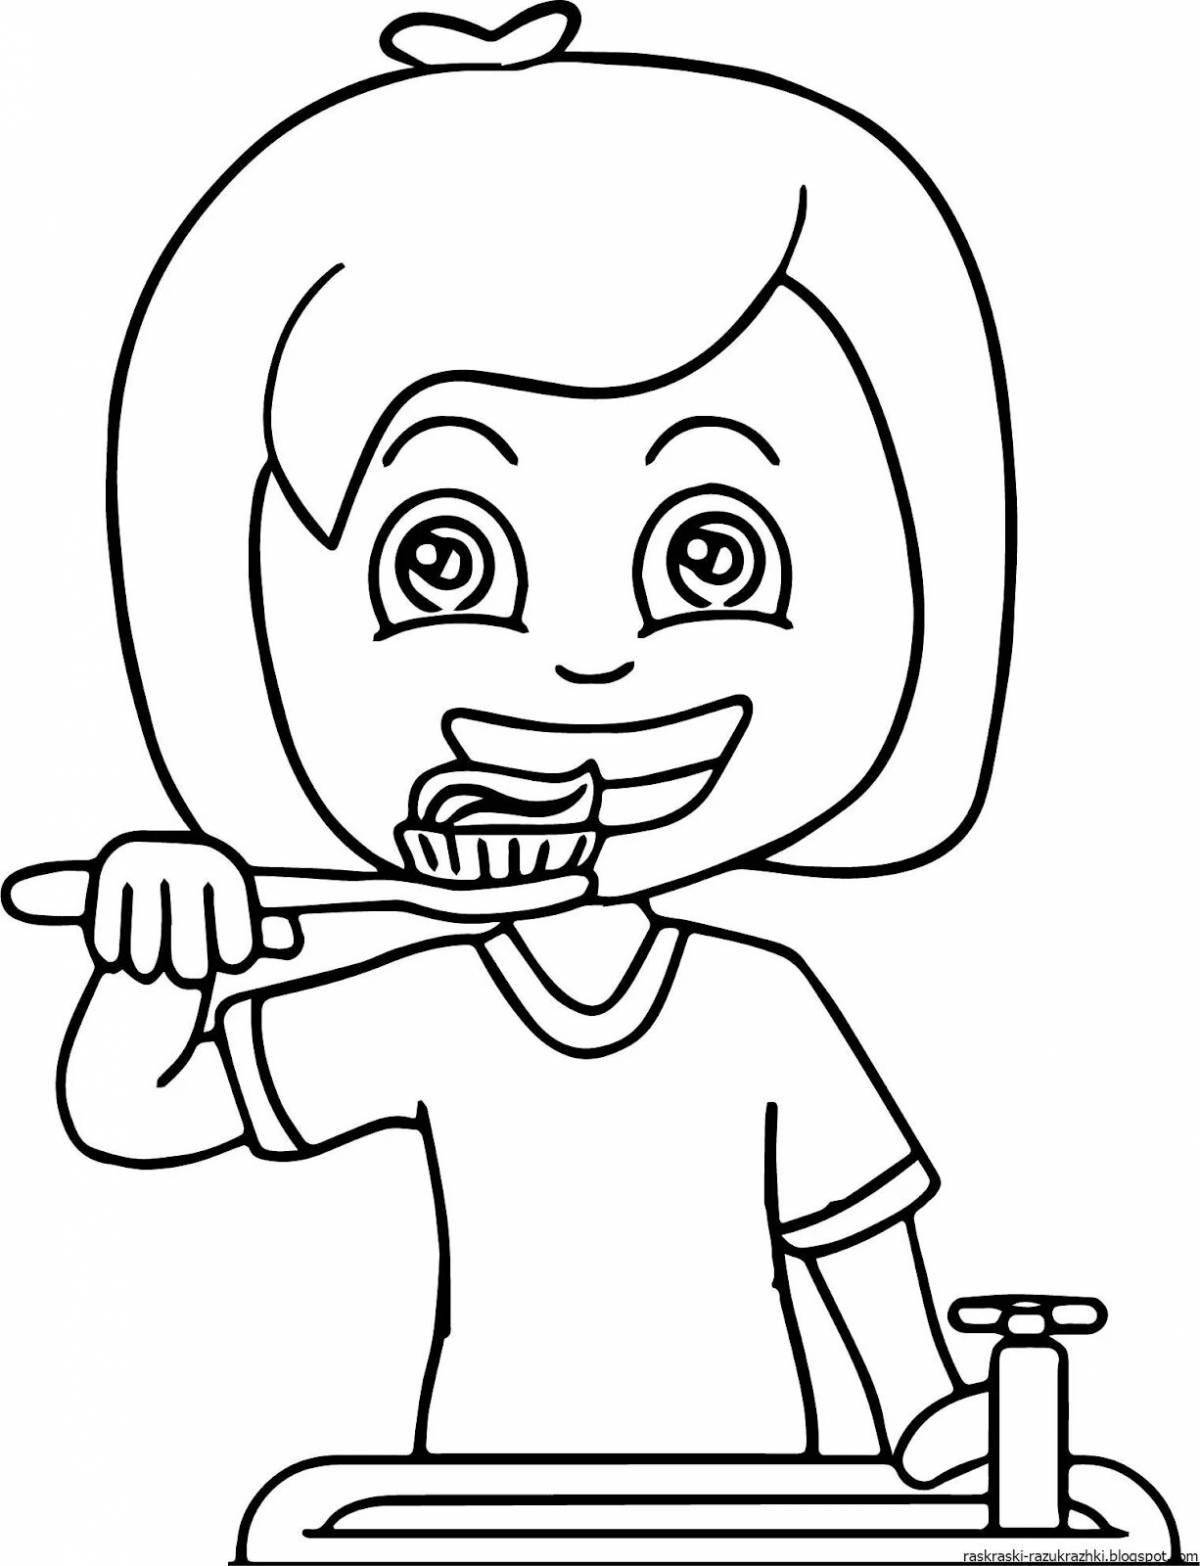 Fun coloring dentist for kids